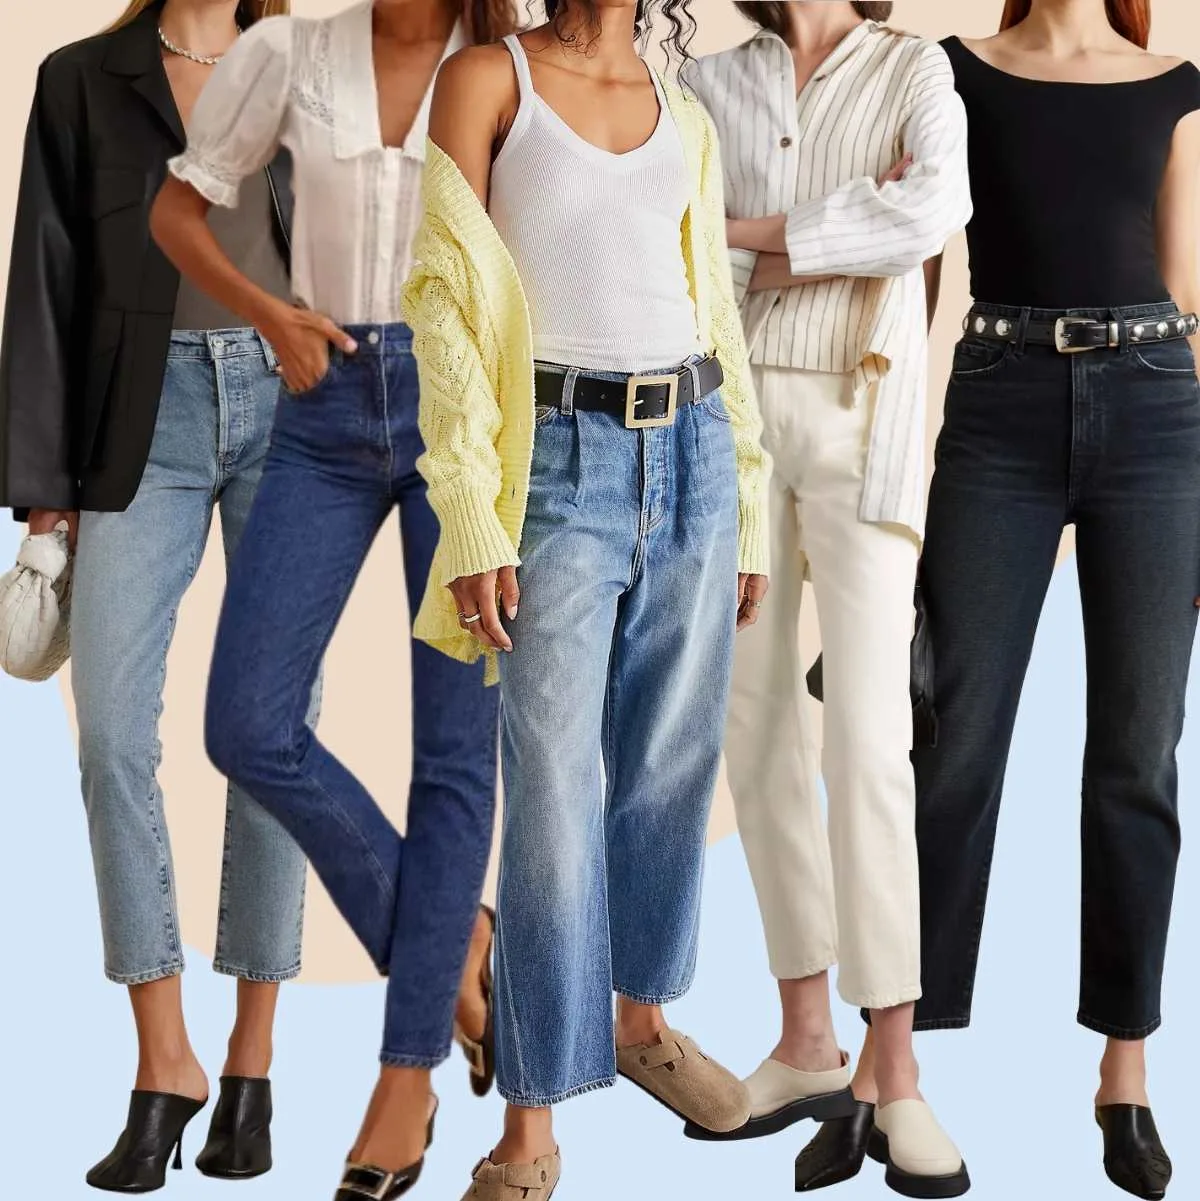 Collage of 5 women wearing different mules outfits with jeans.